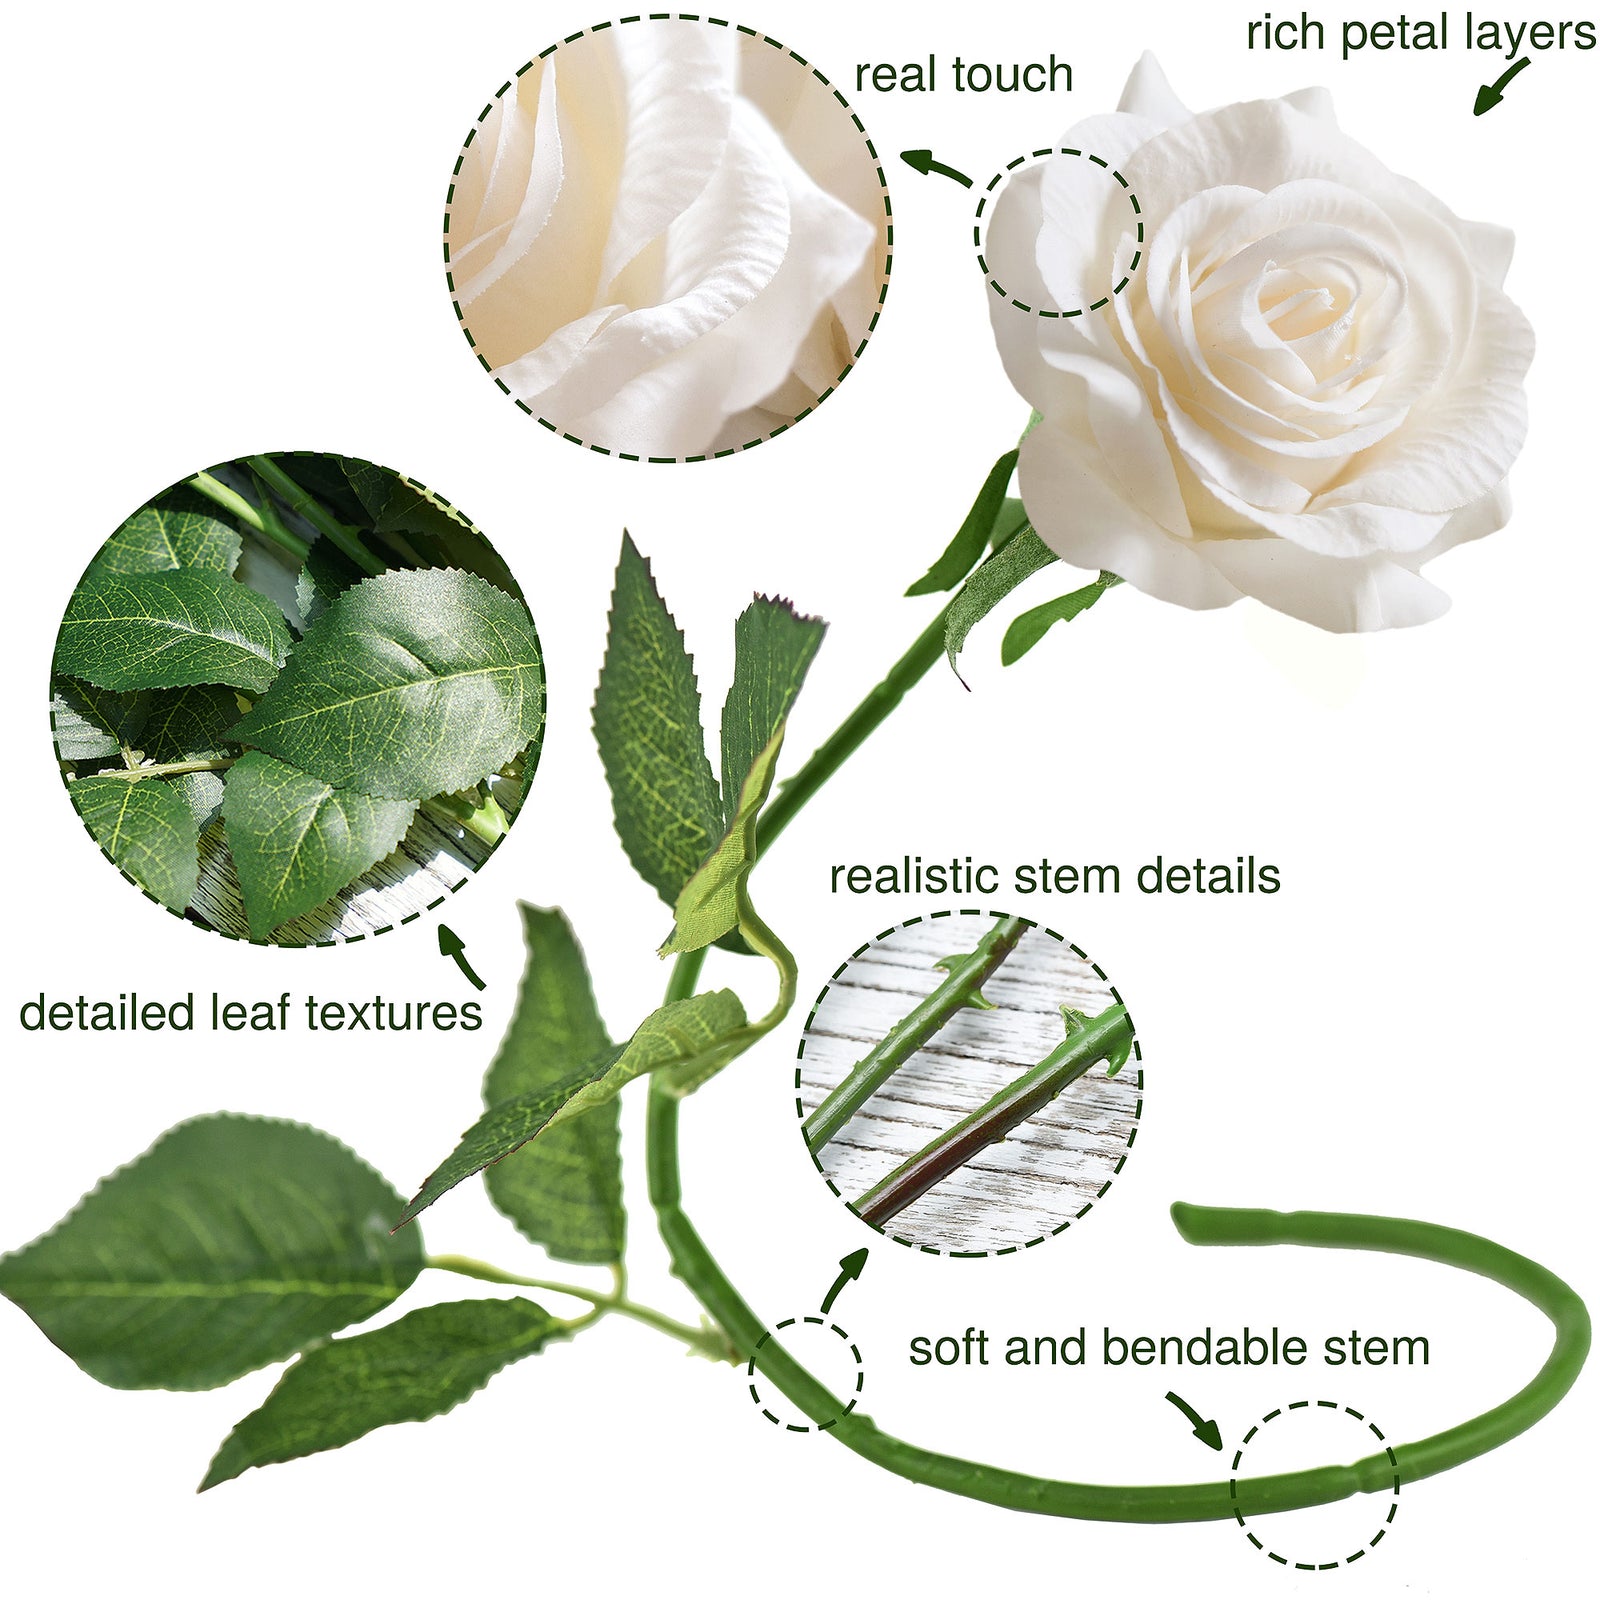 Light Champagne Real Touch Roses Silk Artificial Flowers ‘Petals Feel and Look like Fresh Roses' Wedding, Bridal, Home Décor